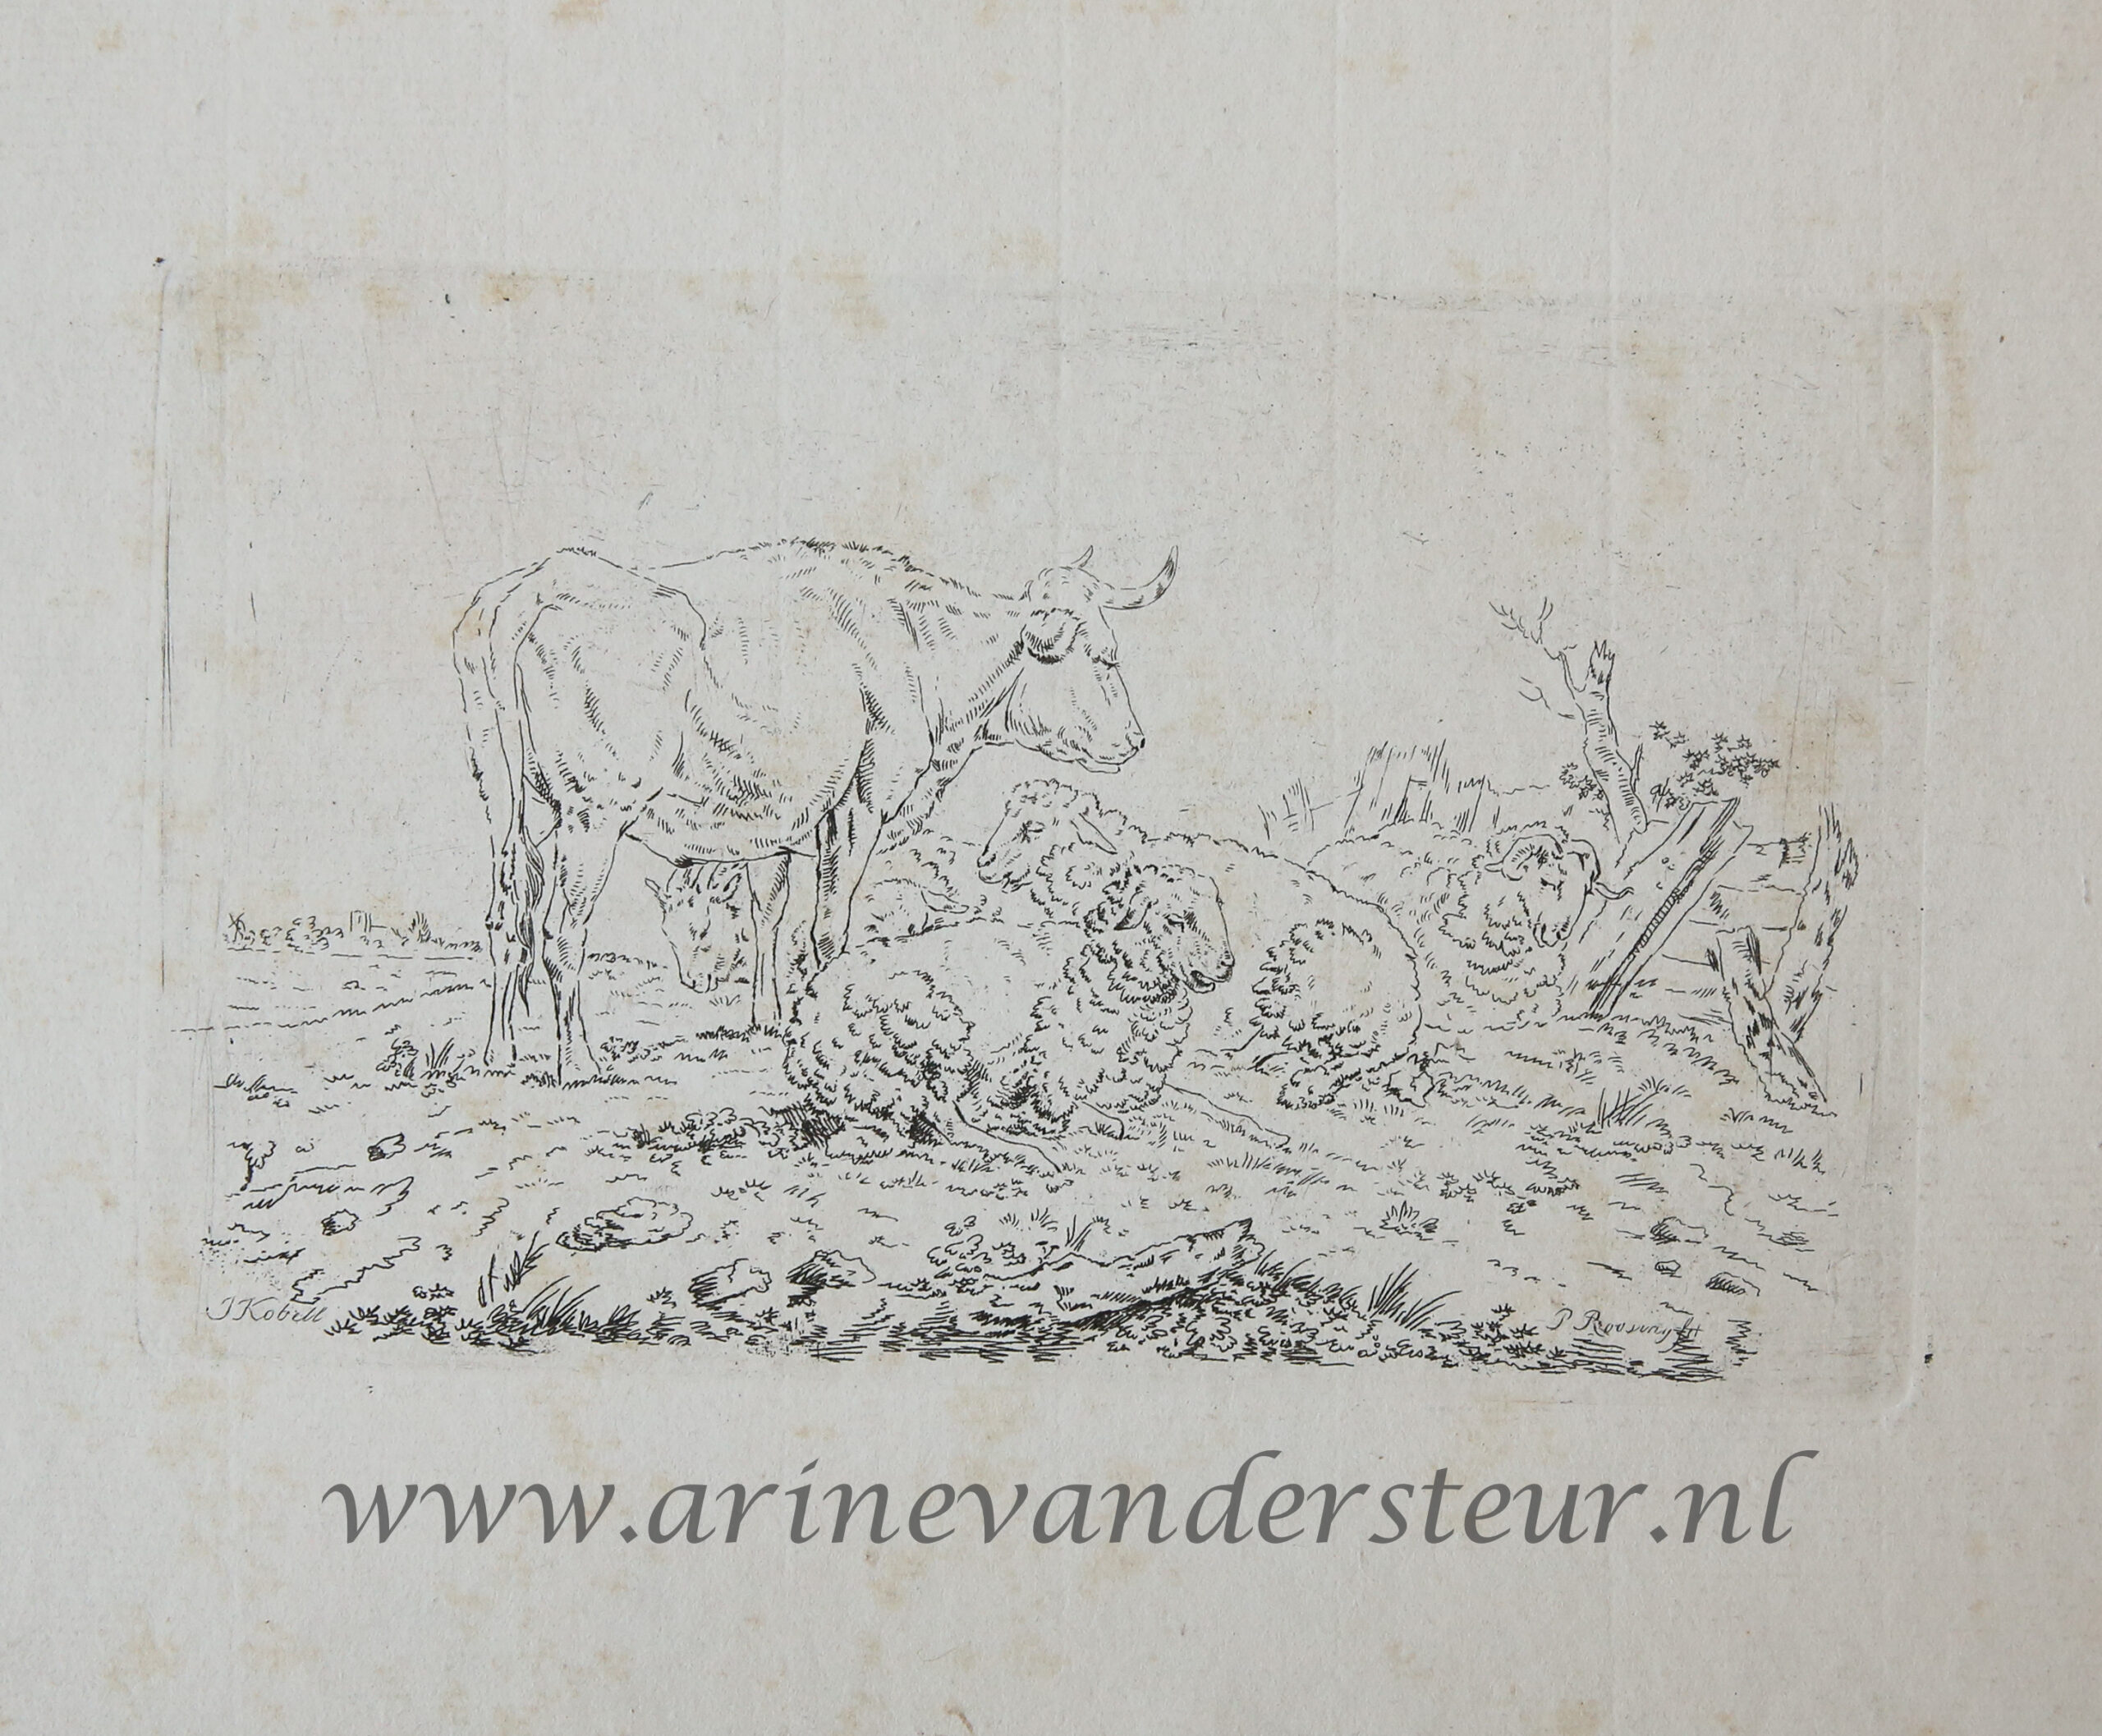 [Original etching, ets] P. Roosing after J. Kobell II. Cow and sheep a meadow, published 1800-1850.